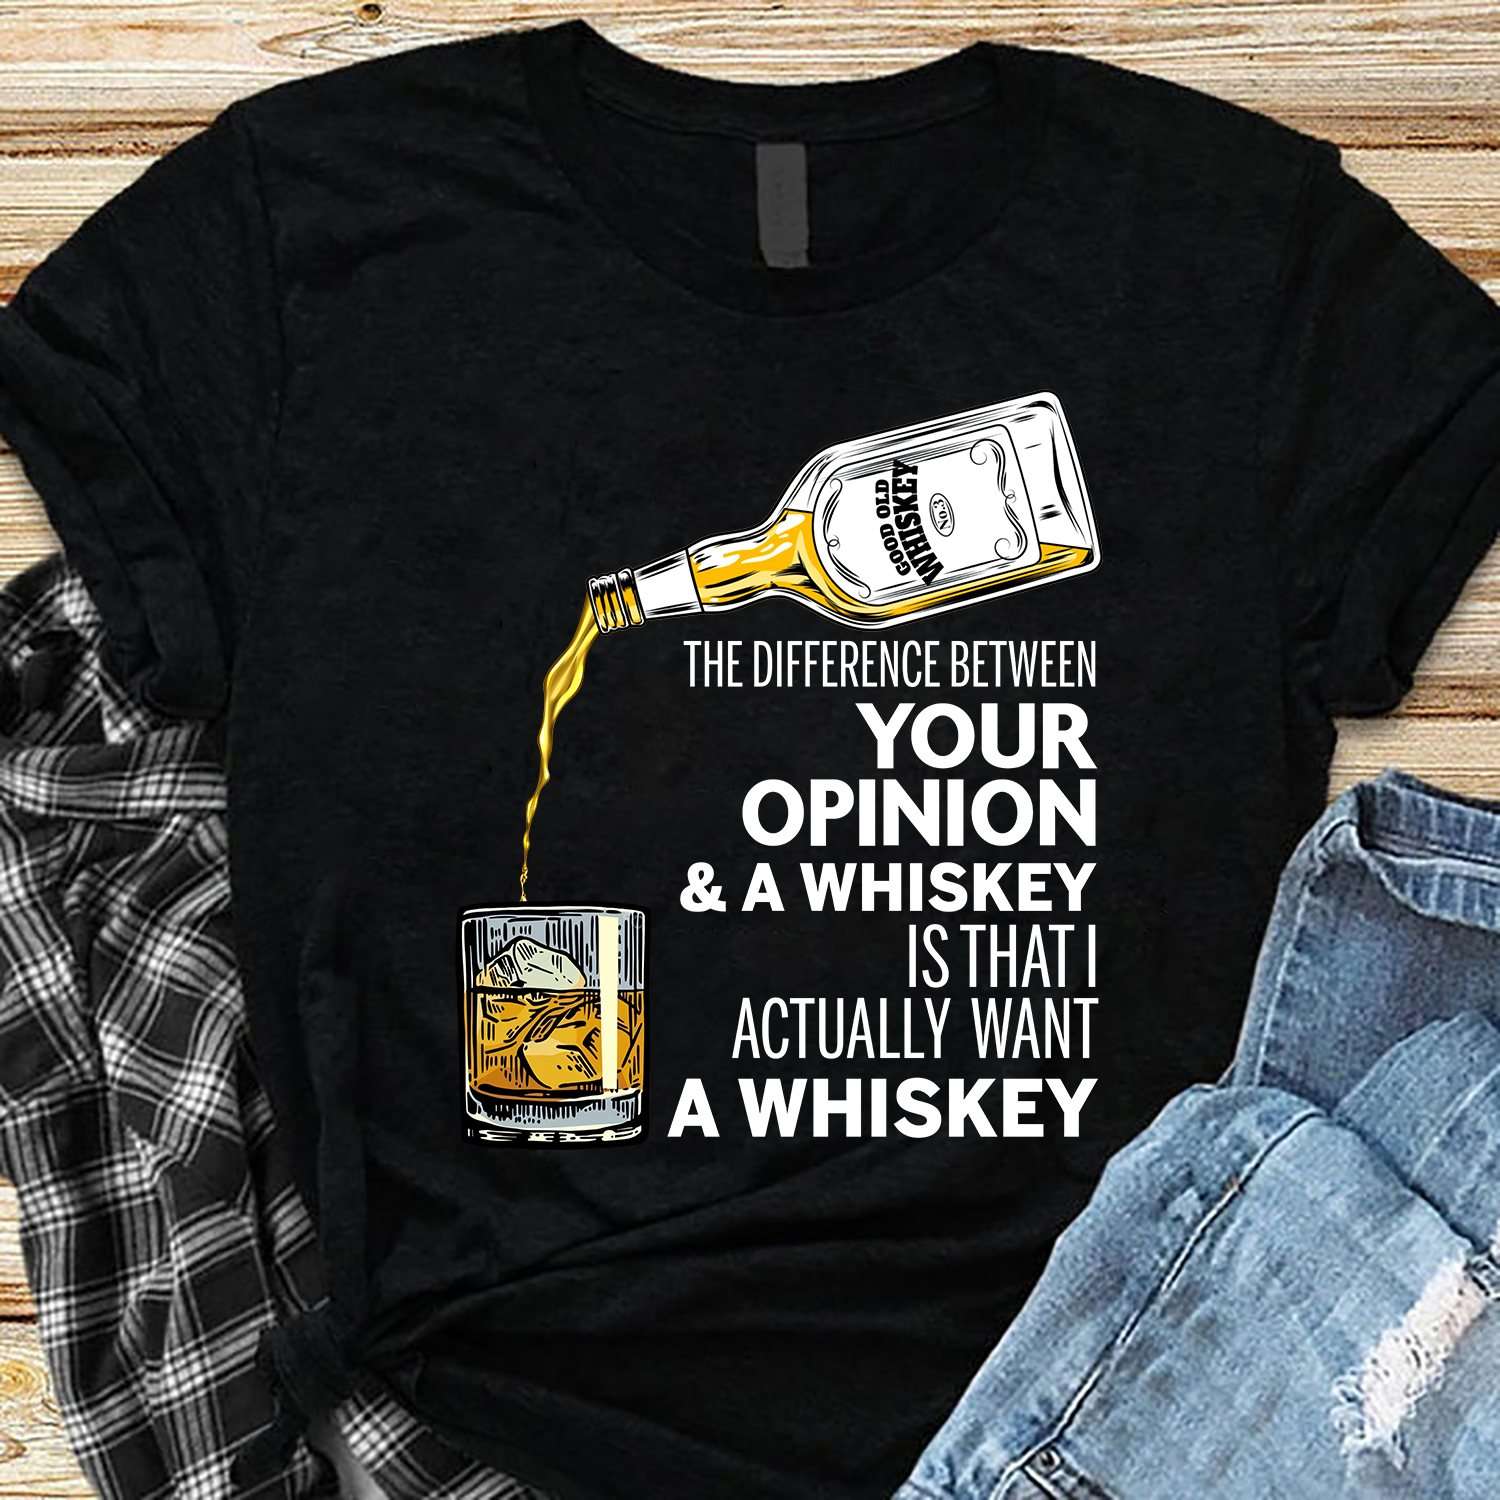 Good Old Whiskey - The difference between your opinion and a whiskey is that i actually want a whiskey